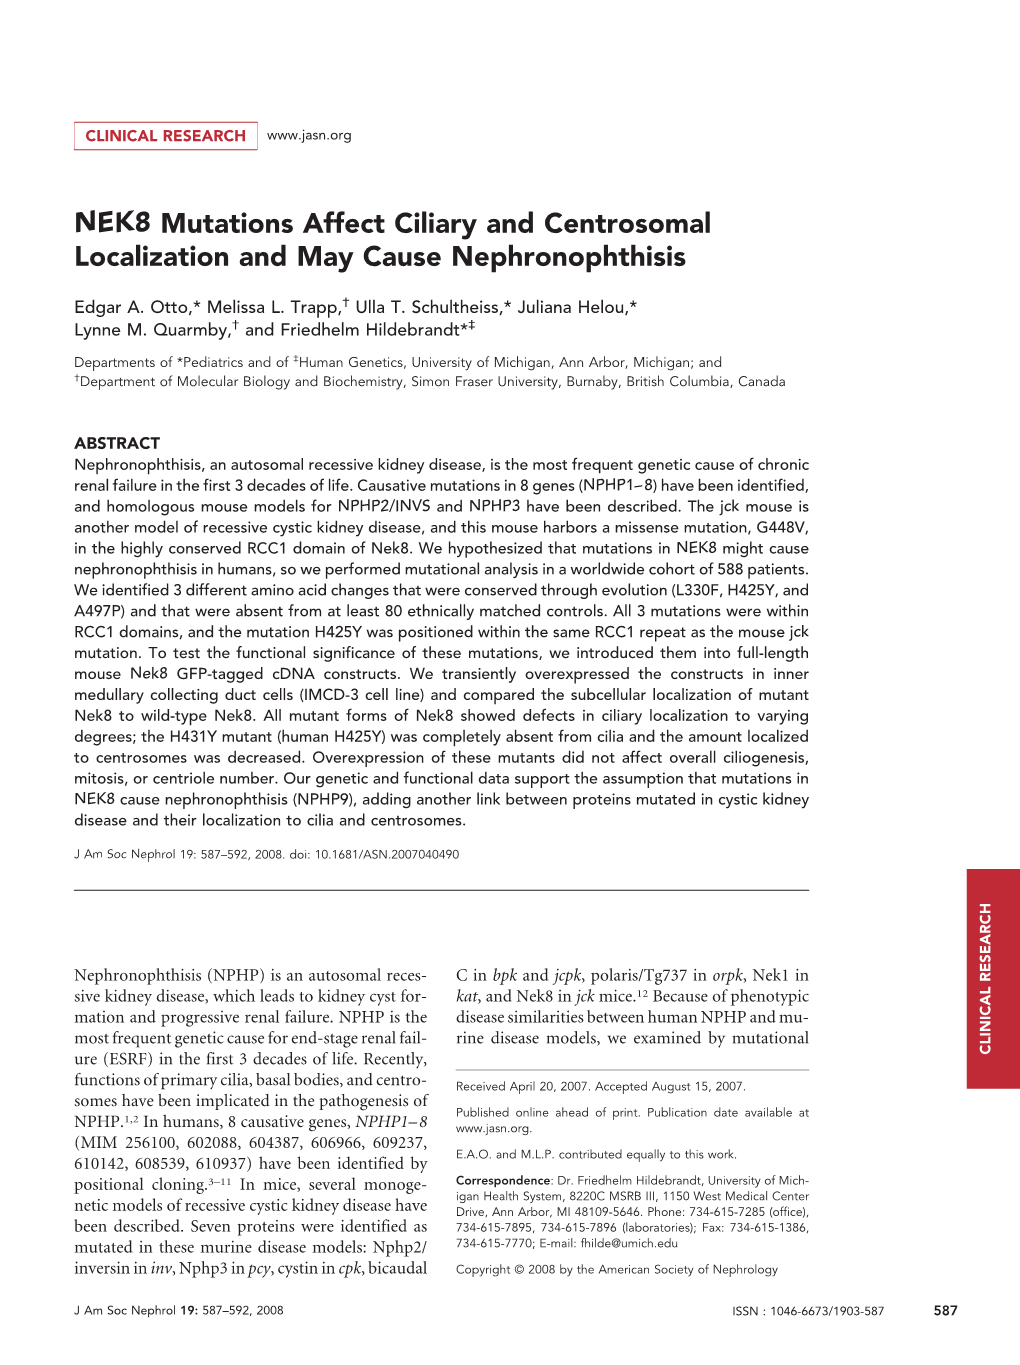 NEK8 Mutations Affect Ciliary and Centrosomal Localization and May Cause Nephronophthisis